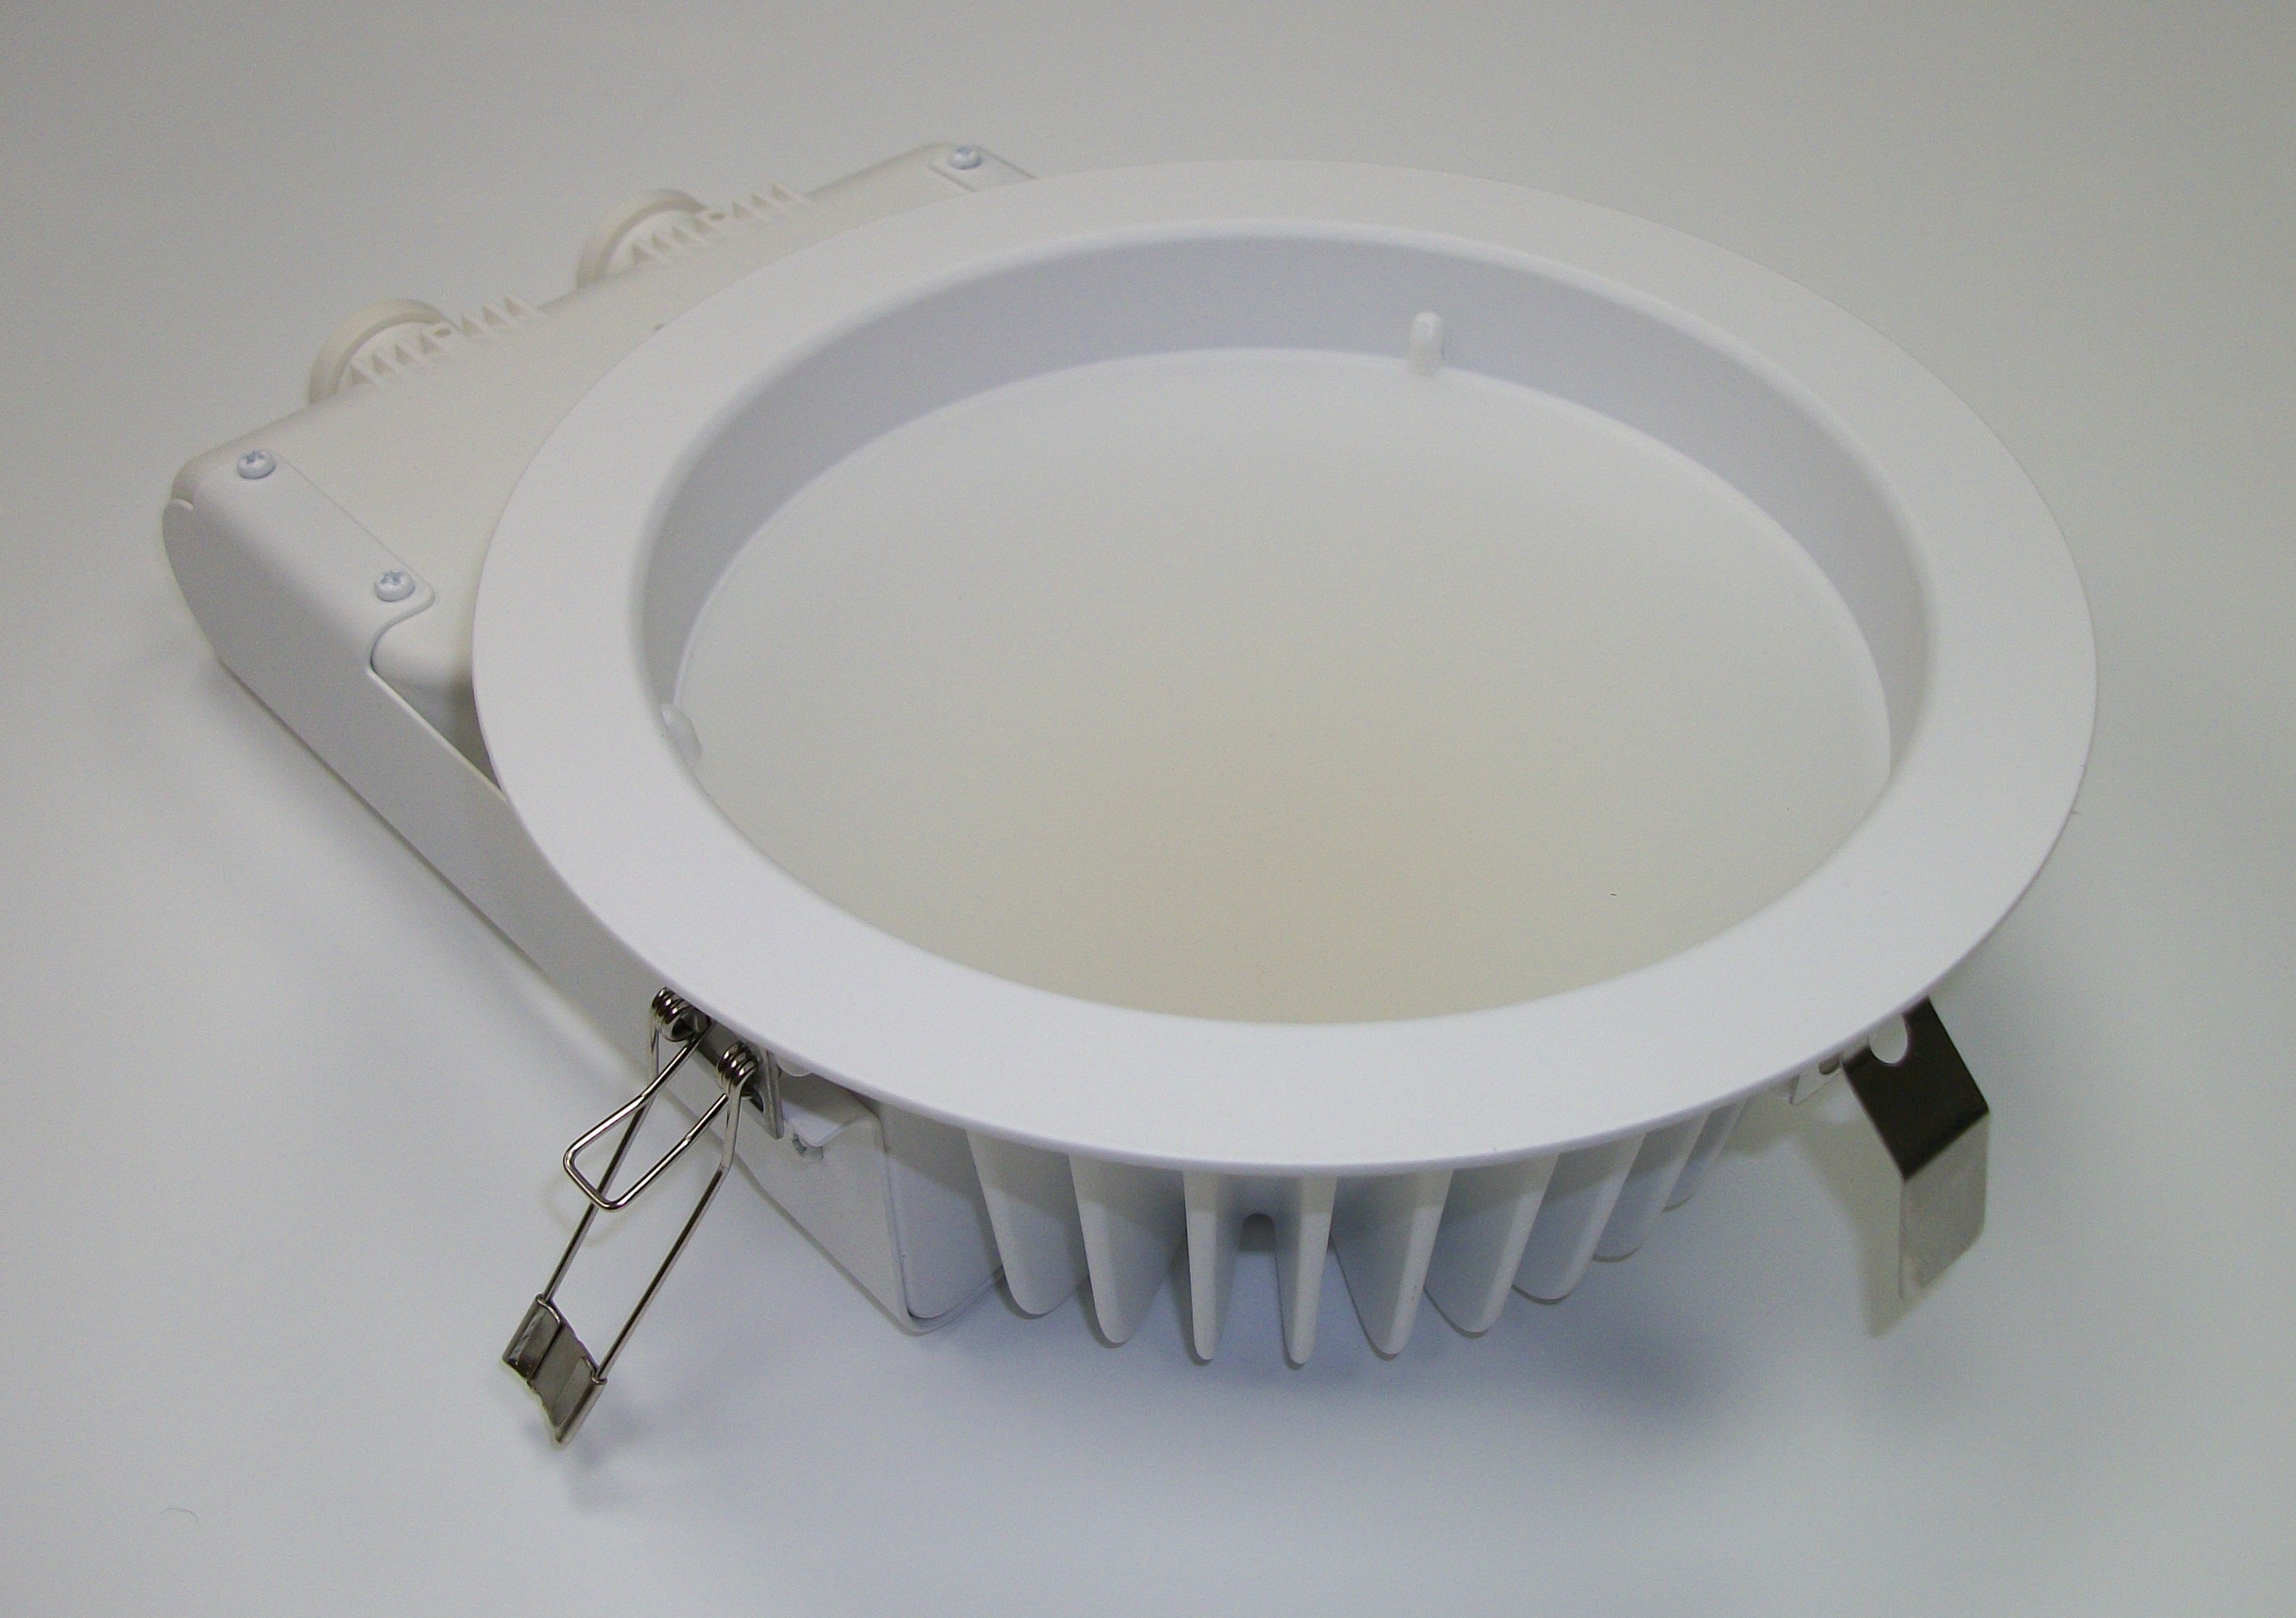 Low Profile Led Recessed Ceiling Lightsrecessed lighting the best 10 low profile recessed lighting 2015